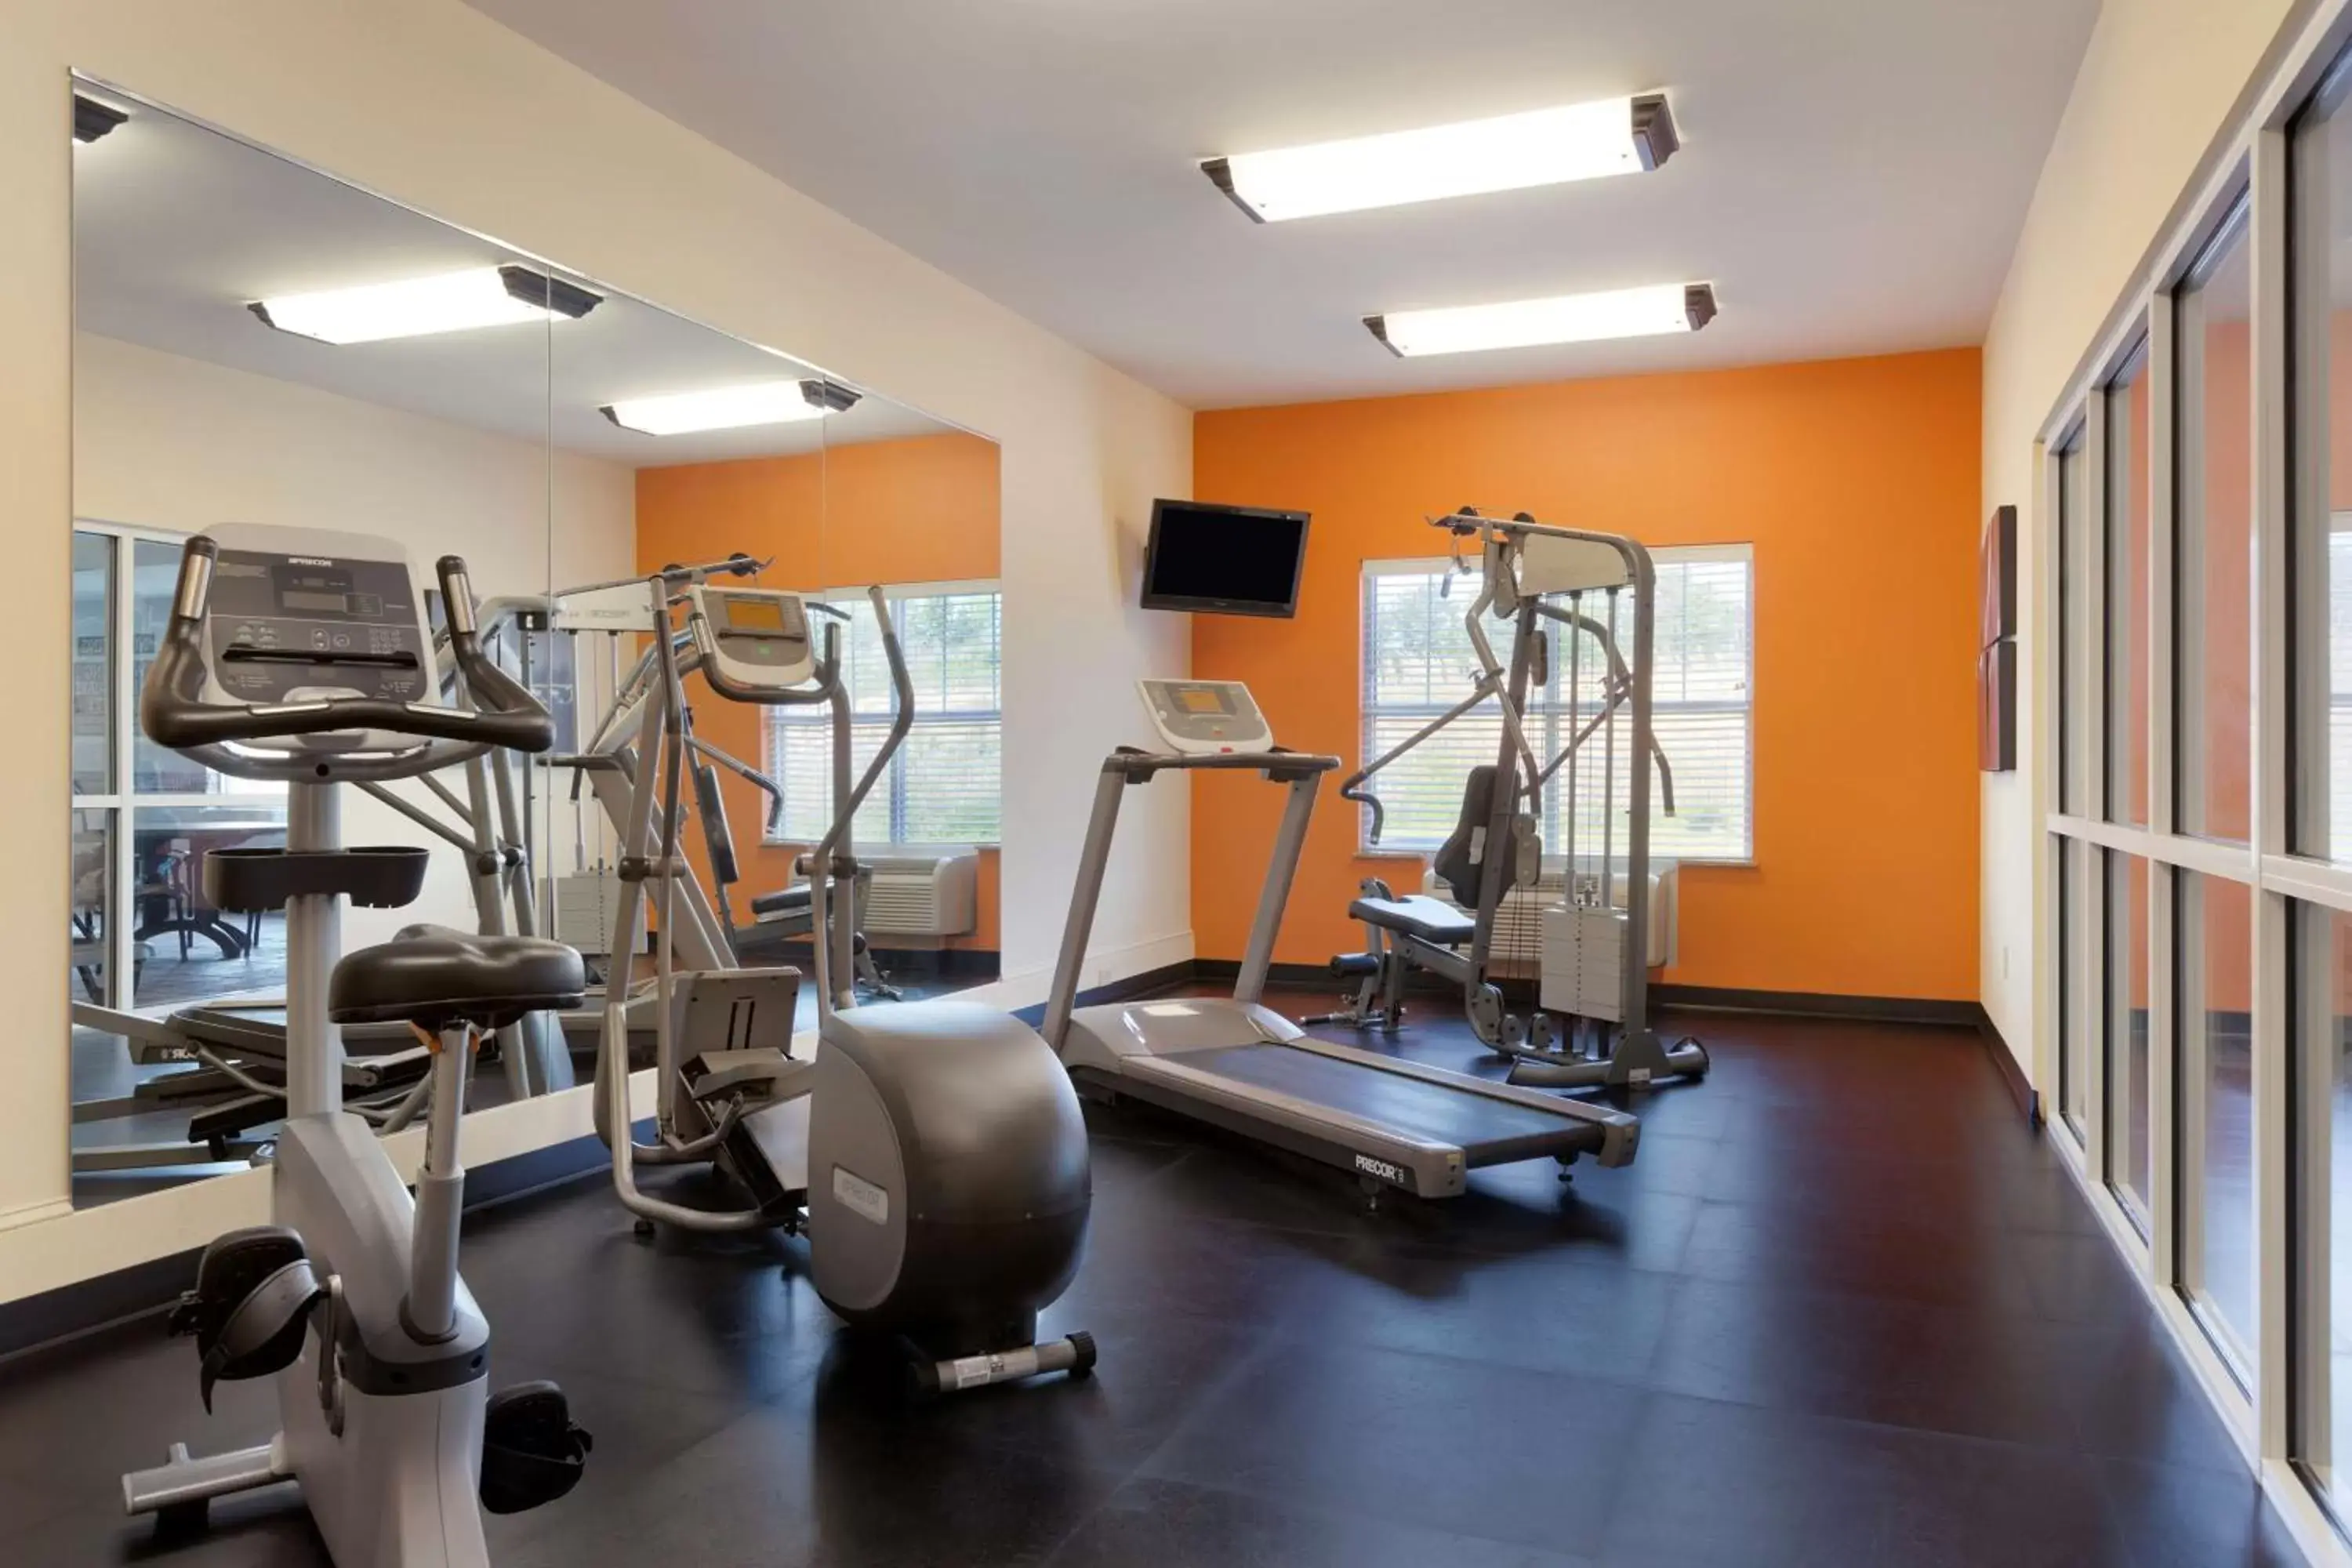 Activities, Fitness Center/Facilities in Country Inn & Suites by Radisson, Ashland - Hanover, VA